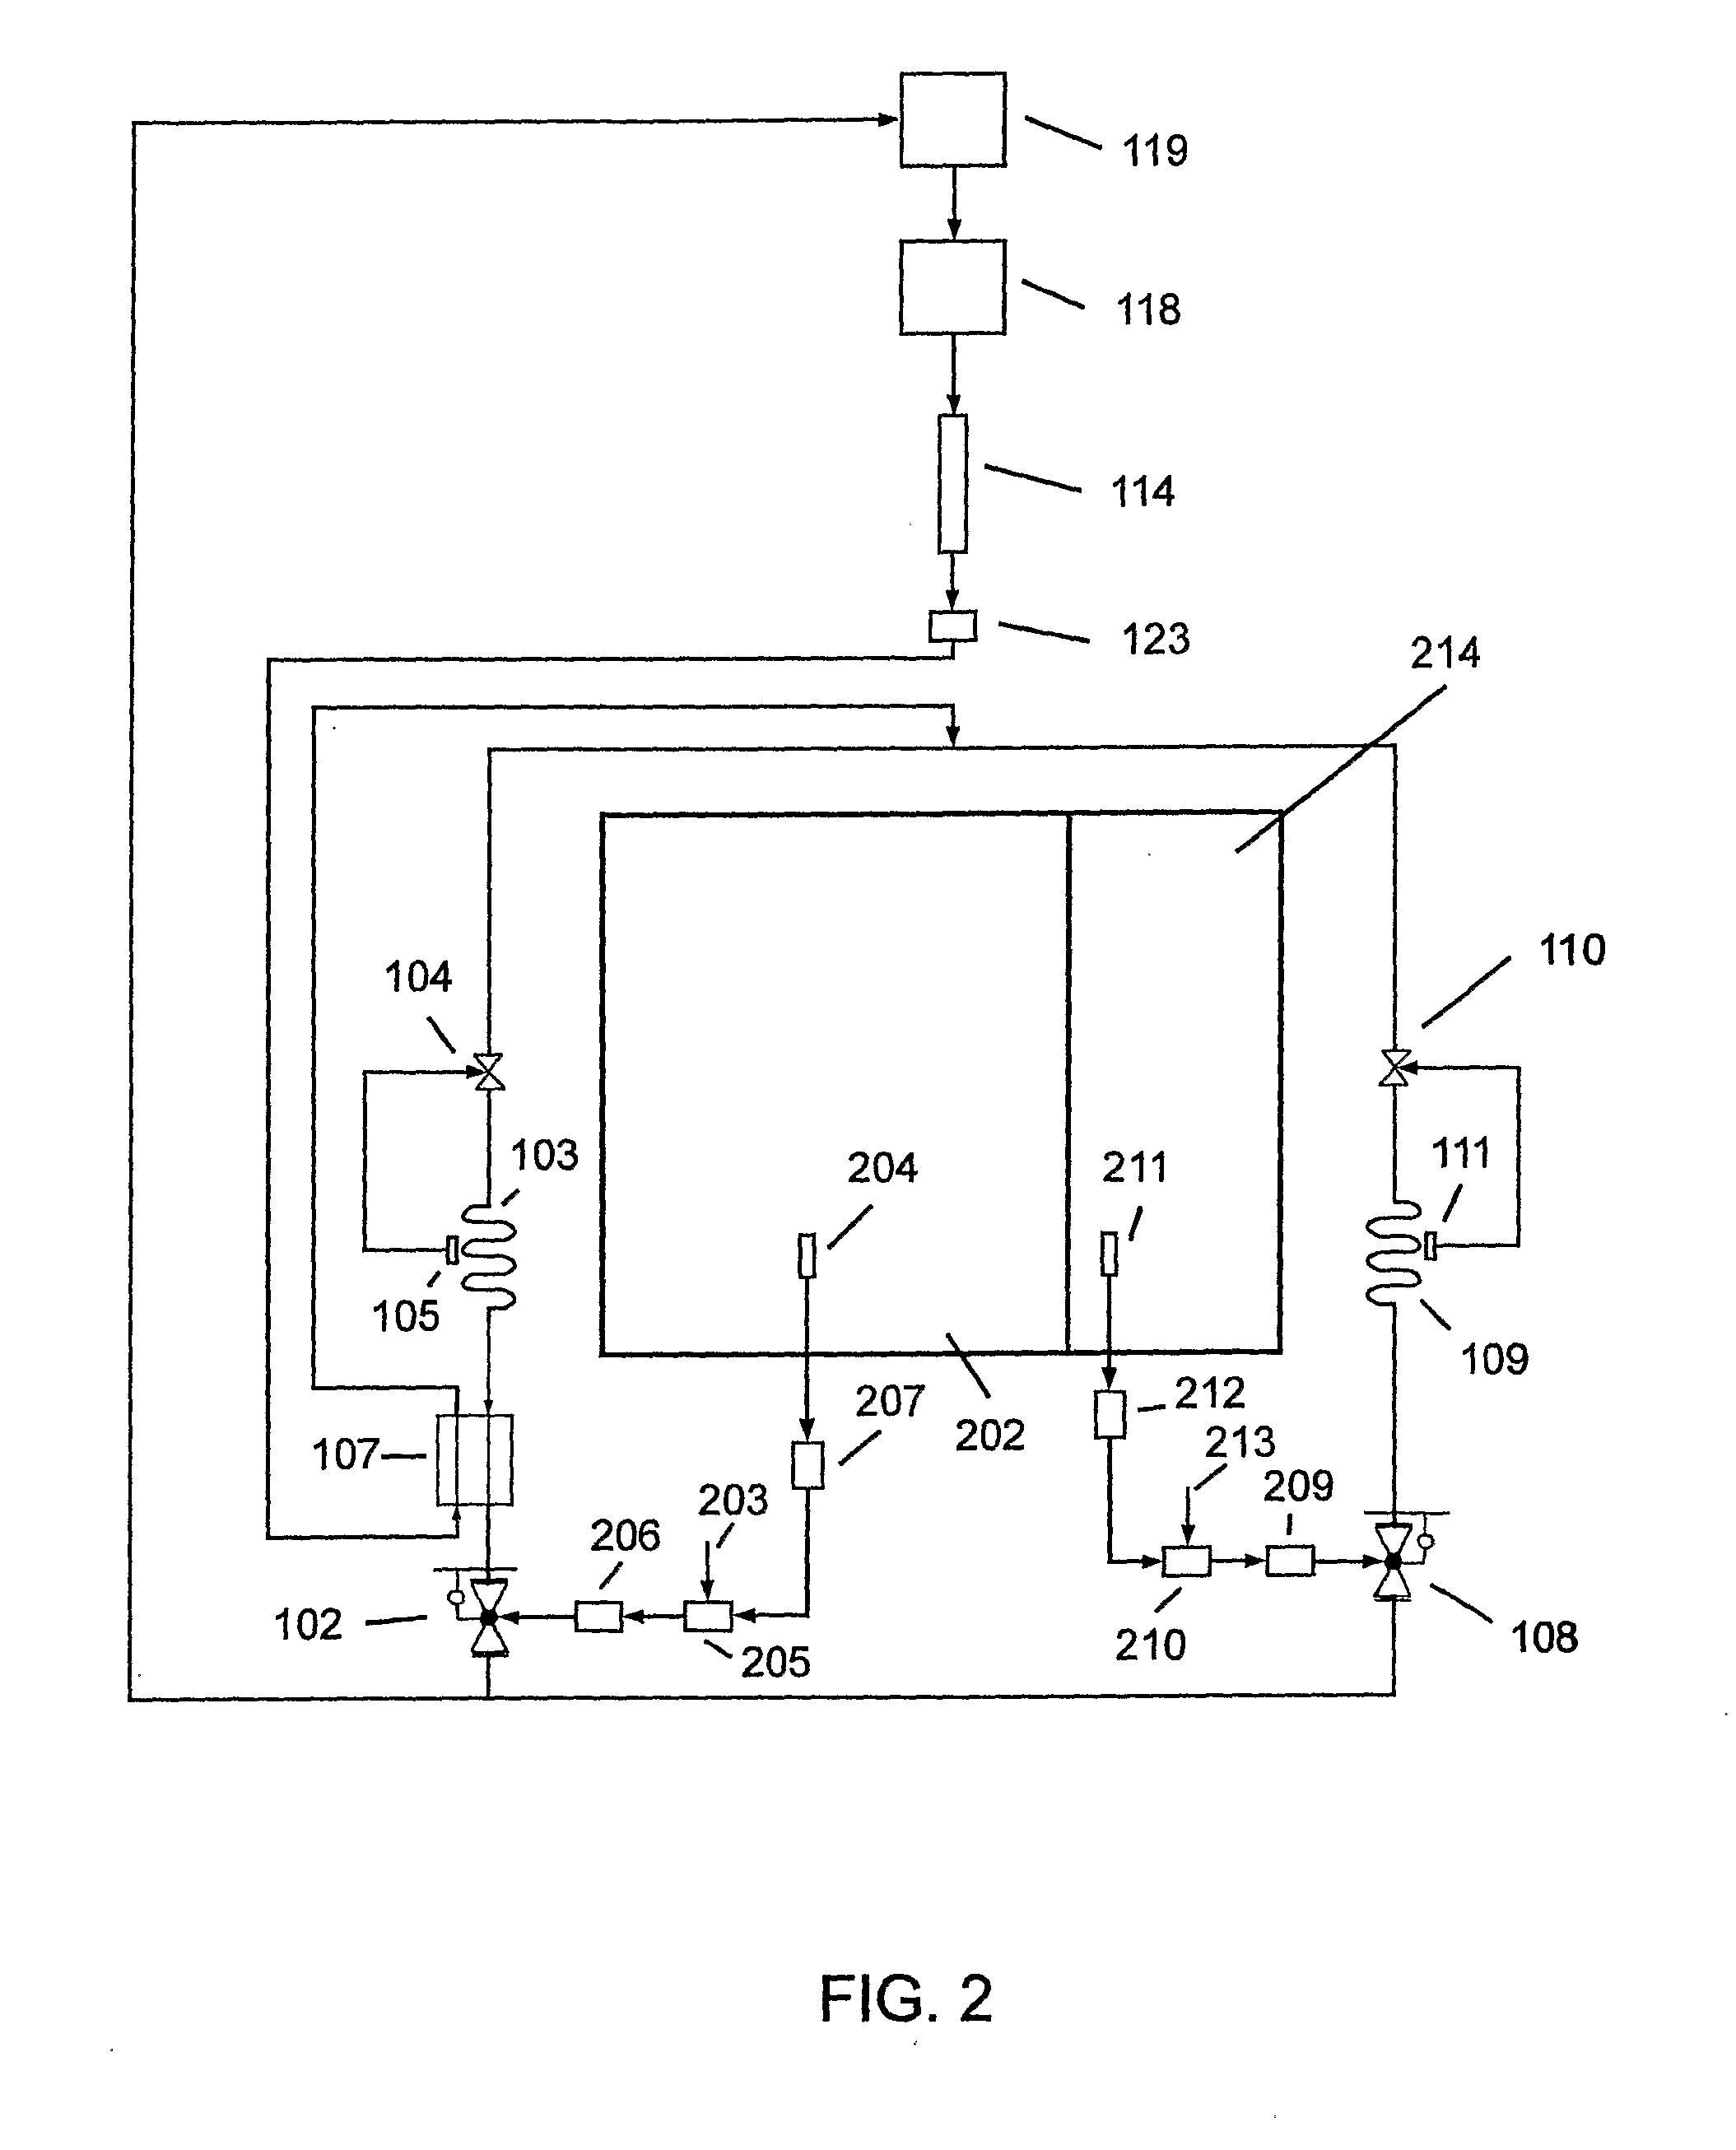 Method for Controlling Temperature in Multiple Compartments for Refrigerated Transport